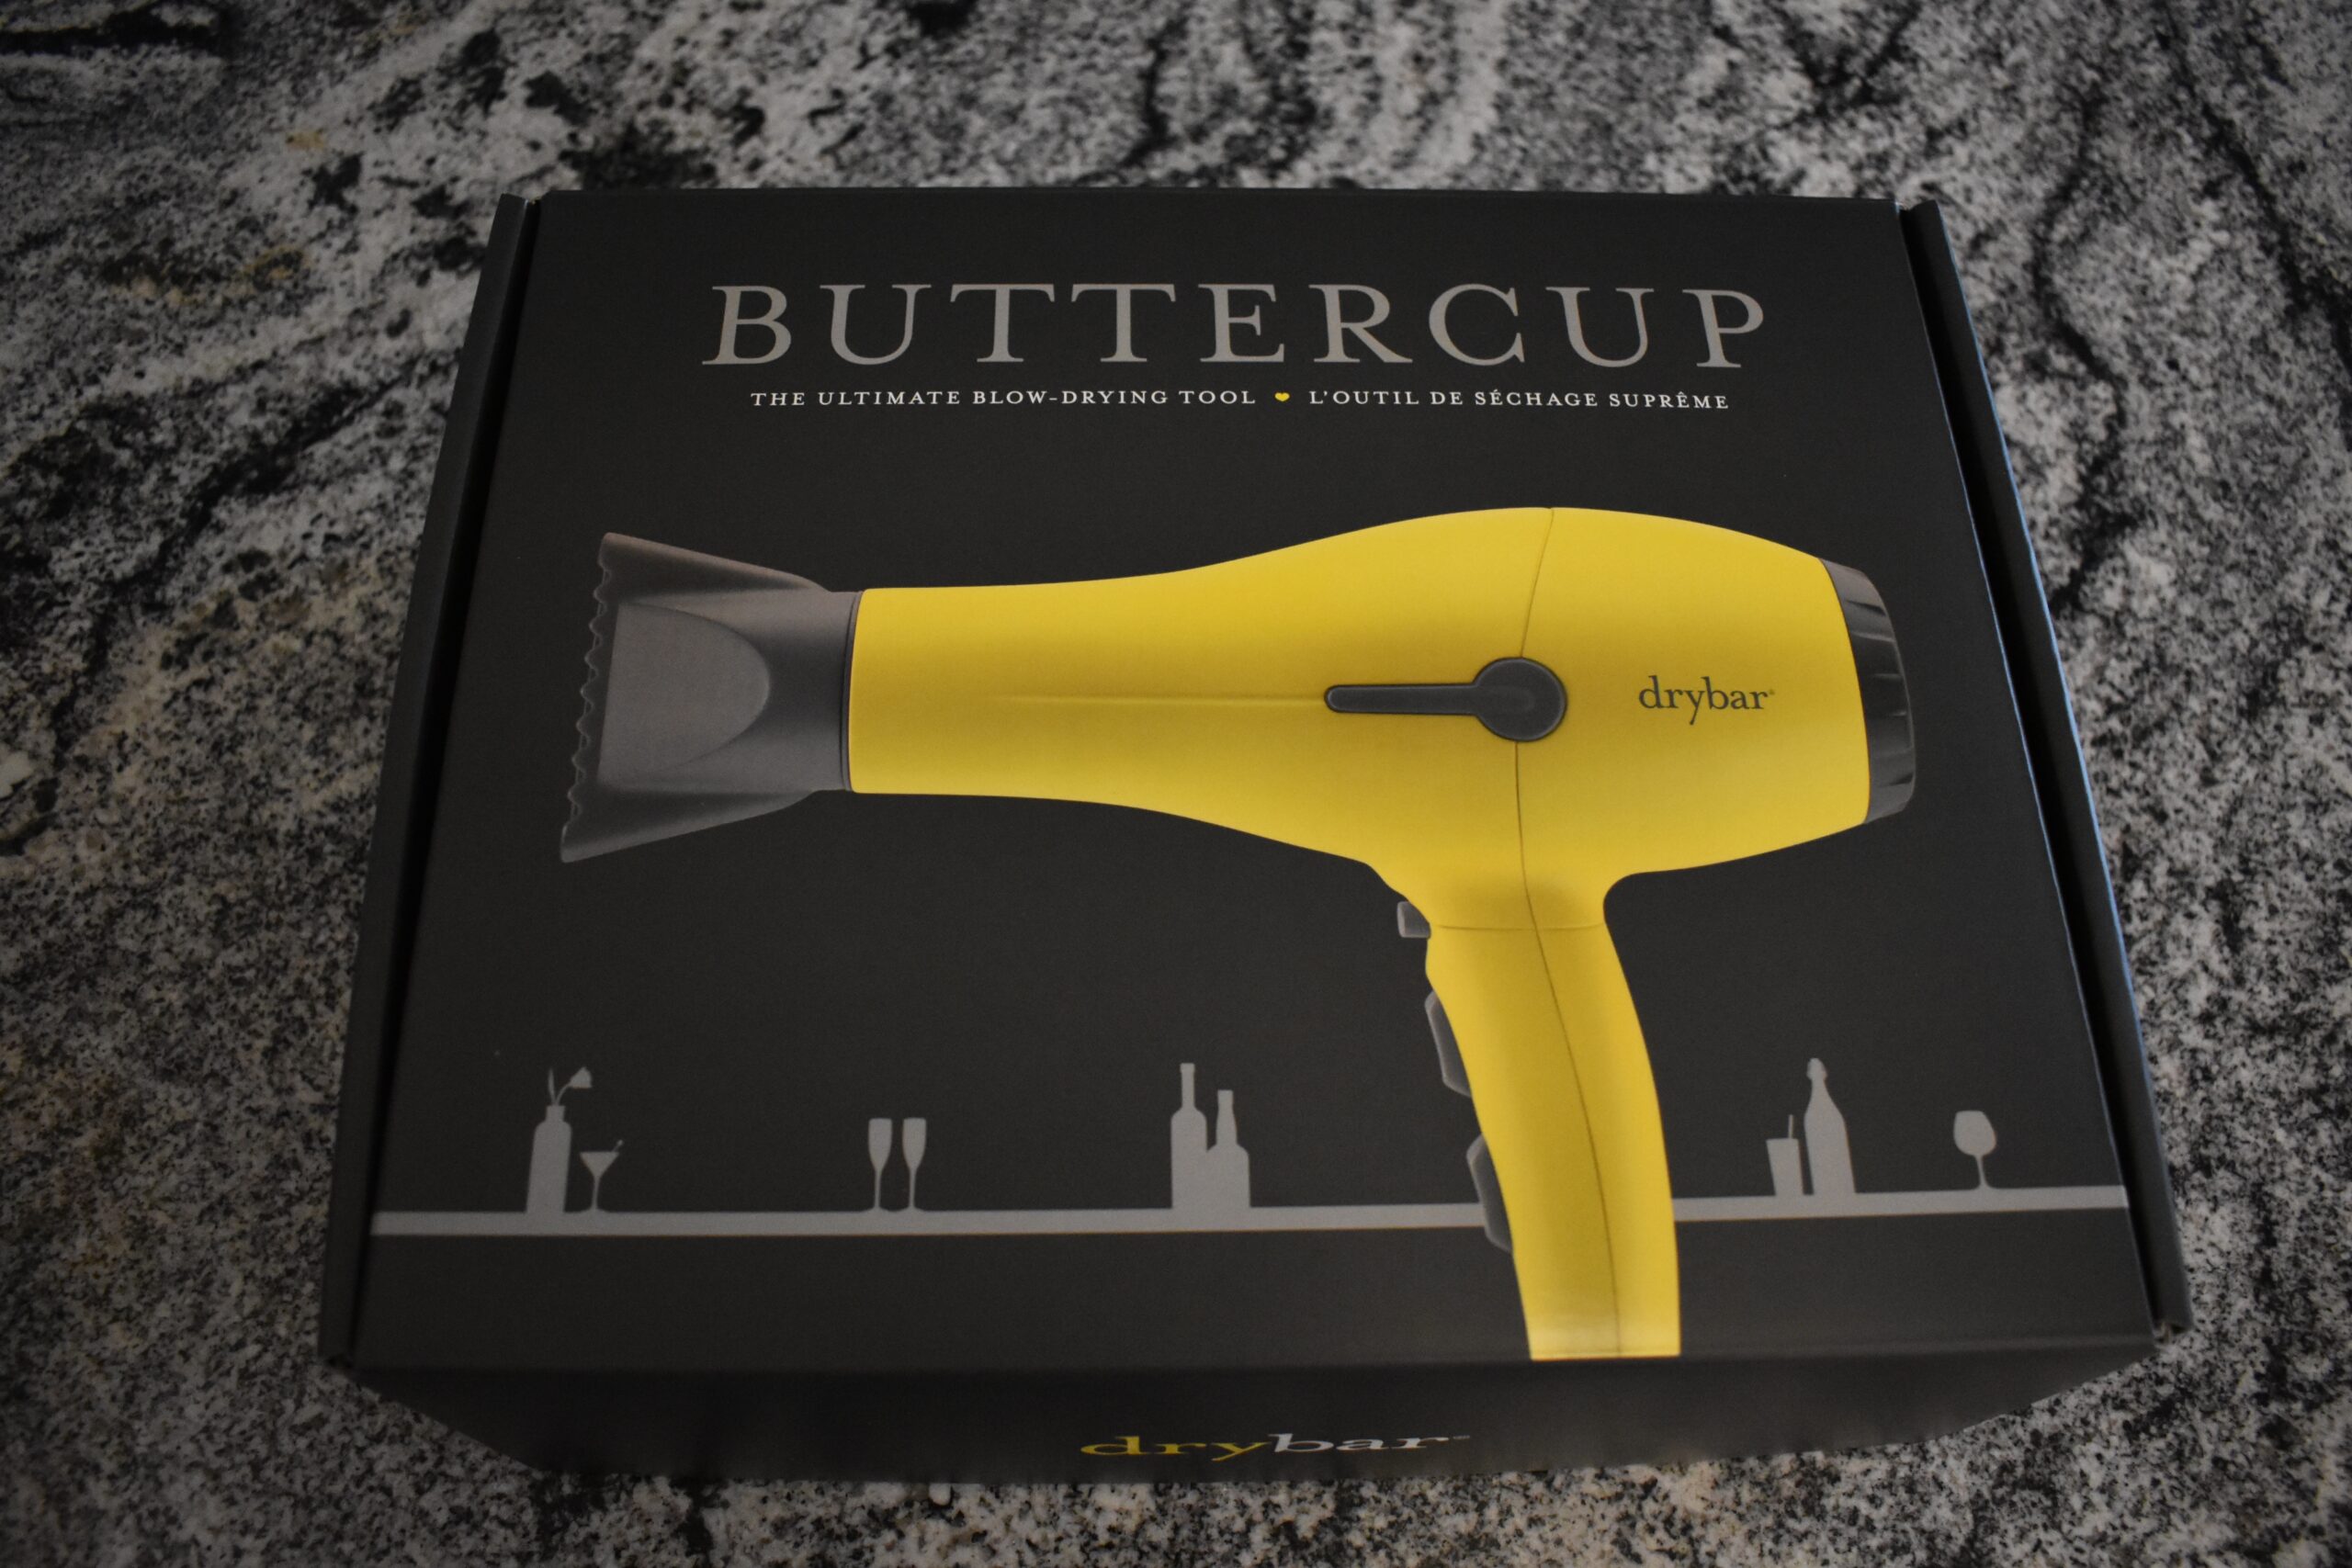 Image of the Drybar Buttercup (the best hair dryer) on the front of the black box